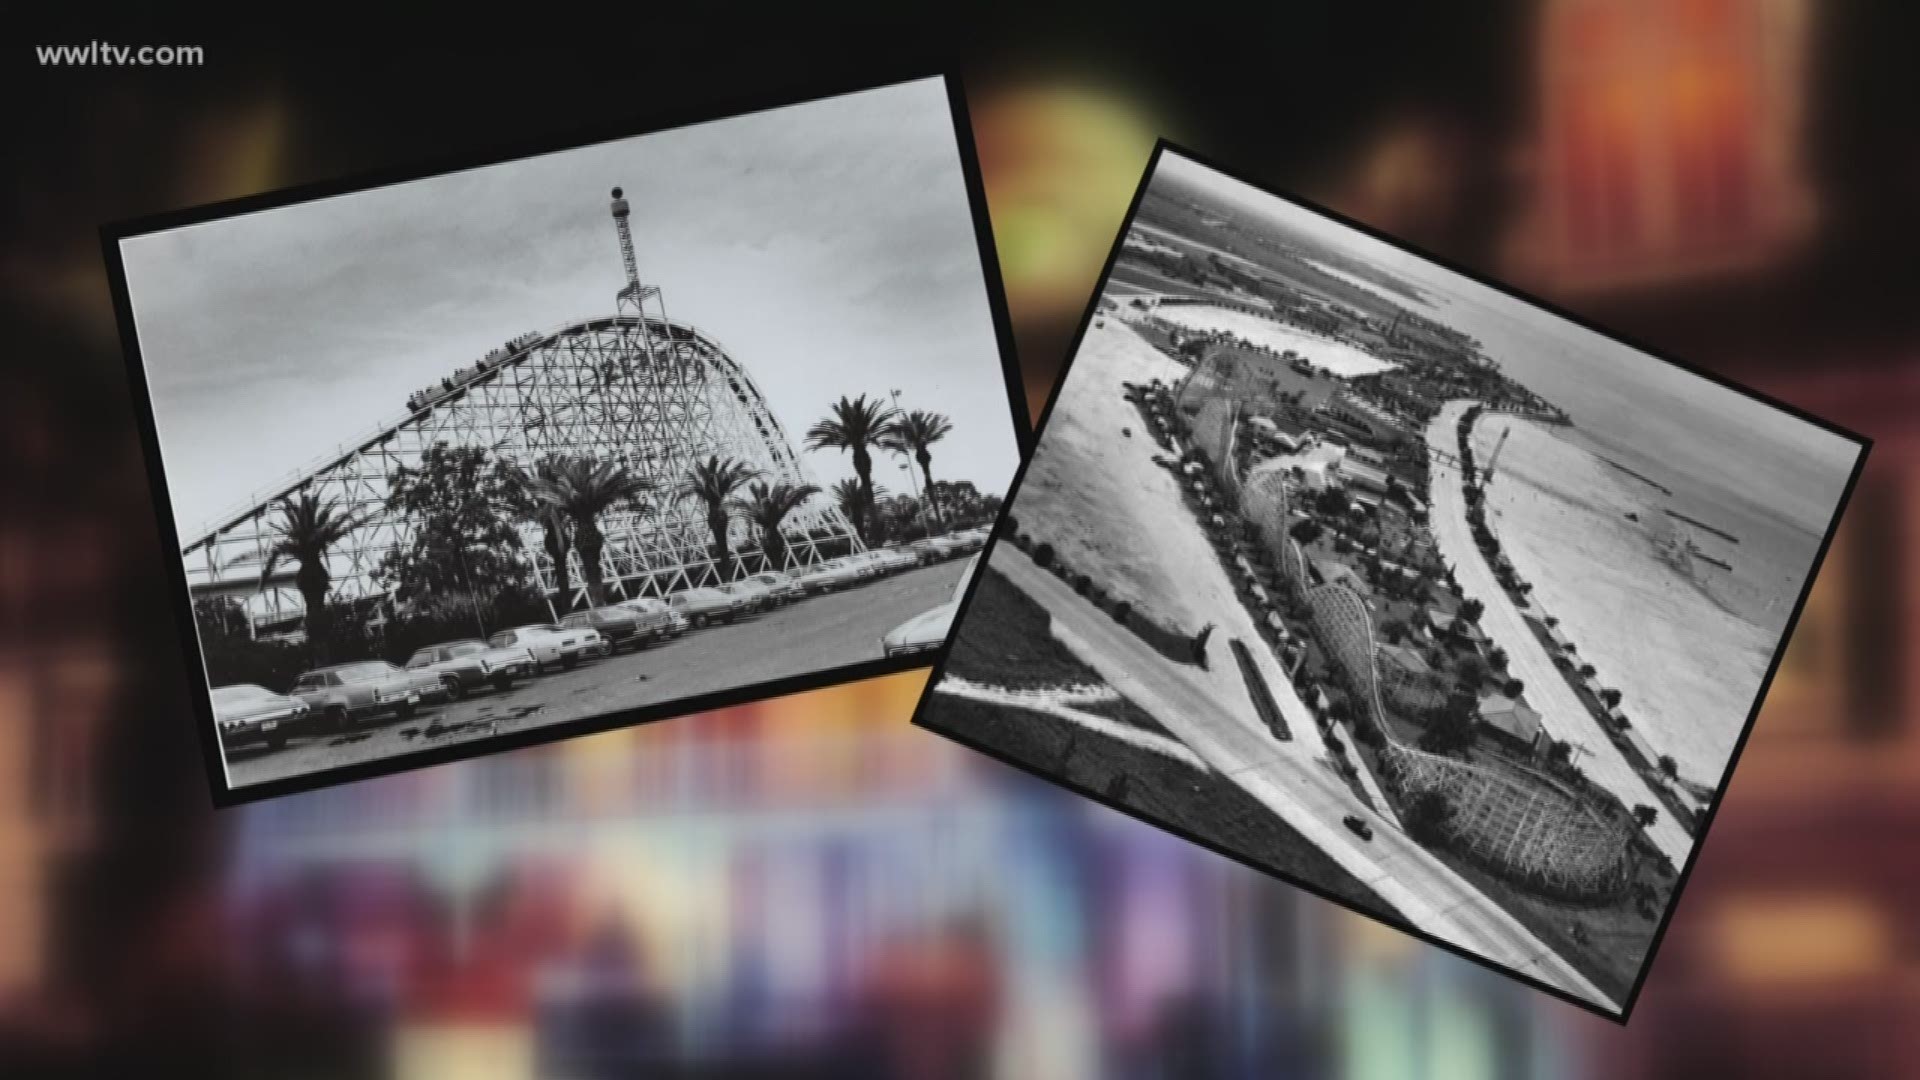 The "Mad Men" actor and grandson of the original Pontchartrain beach park owner reflects on growing up with the amusement park.